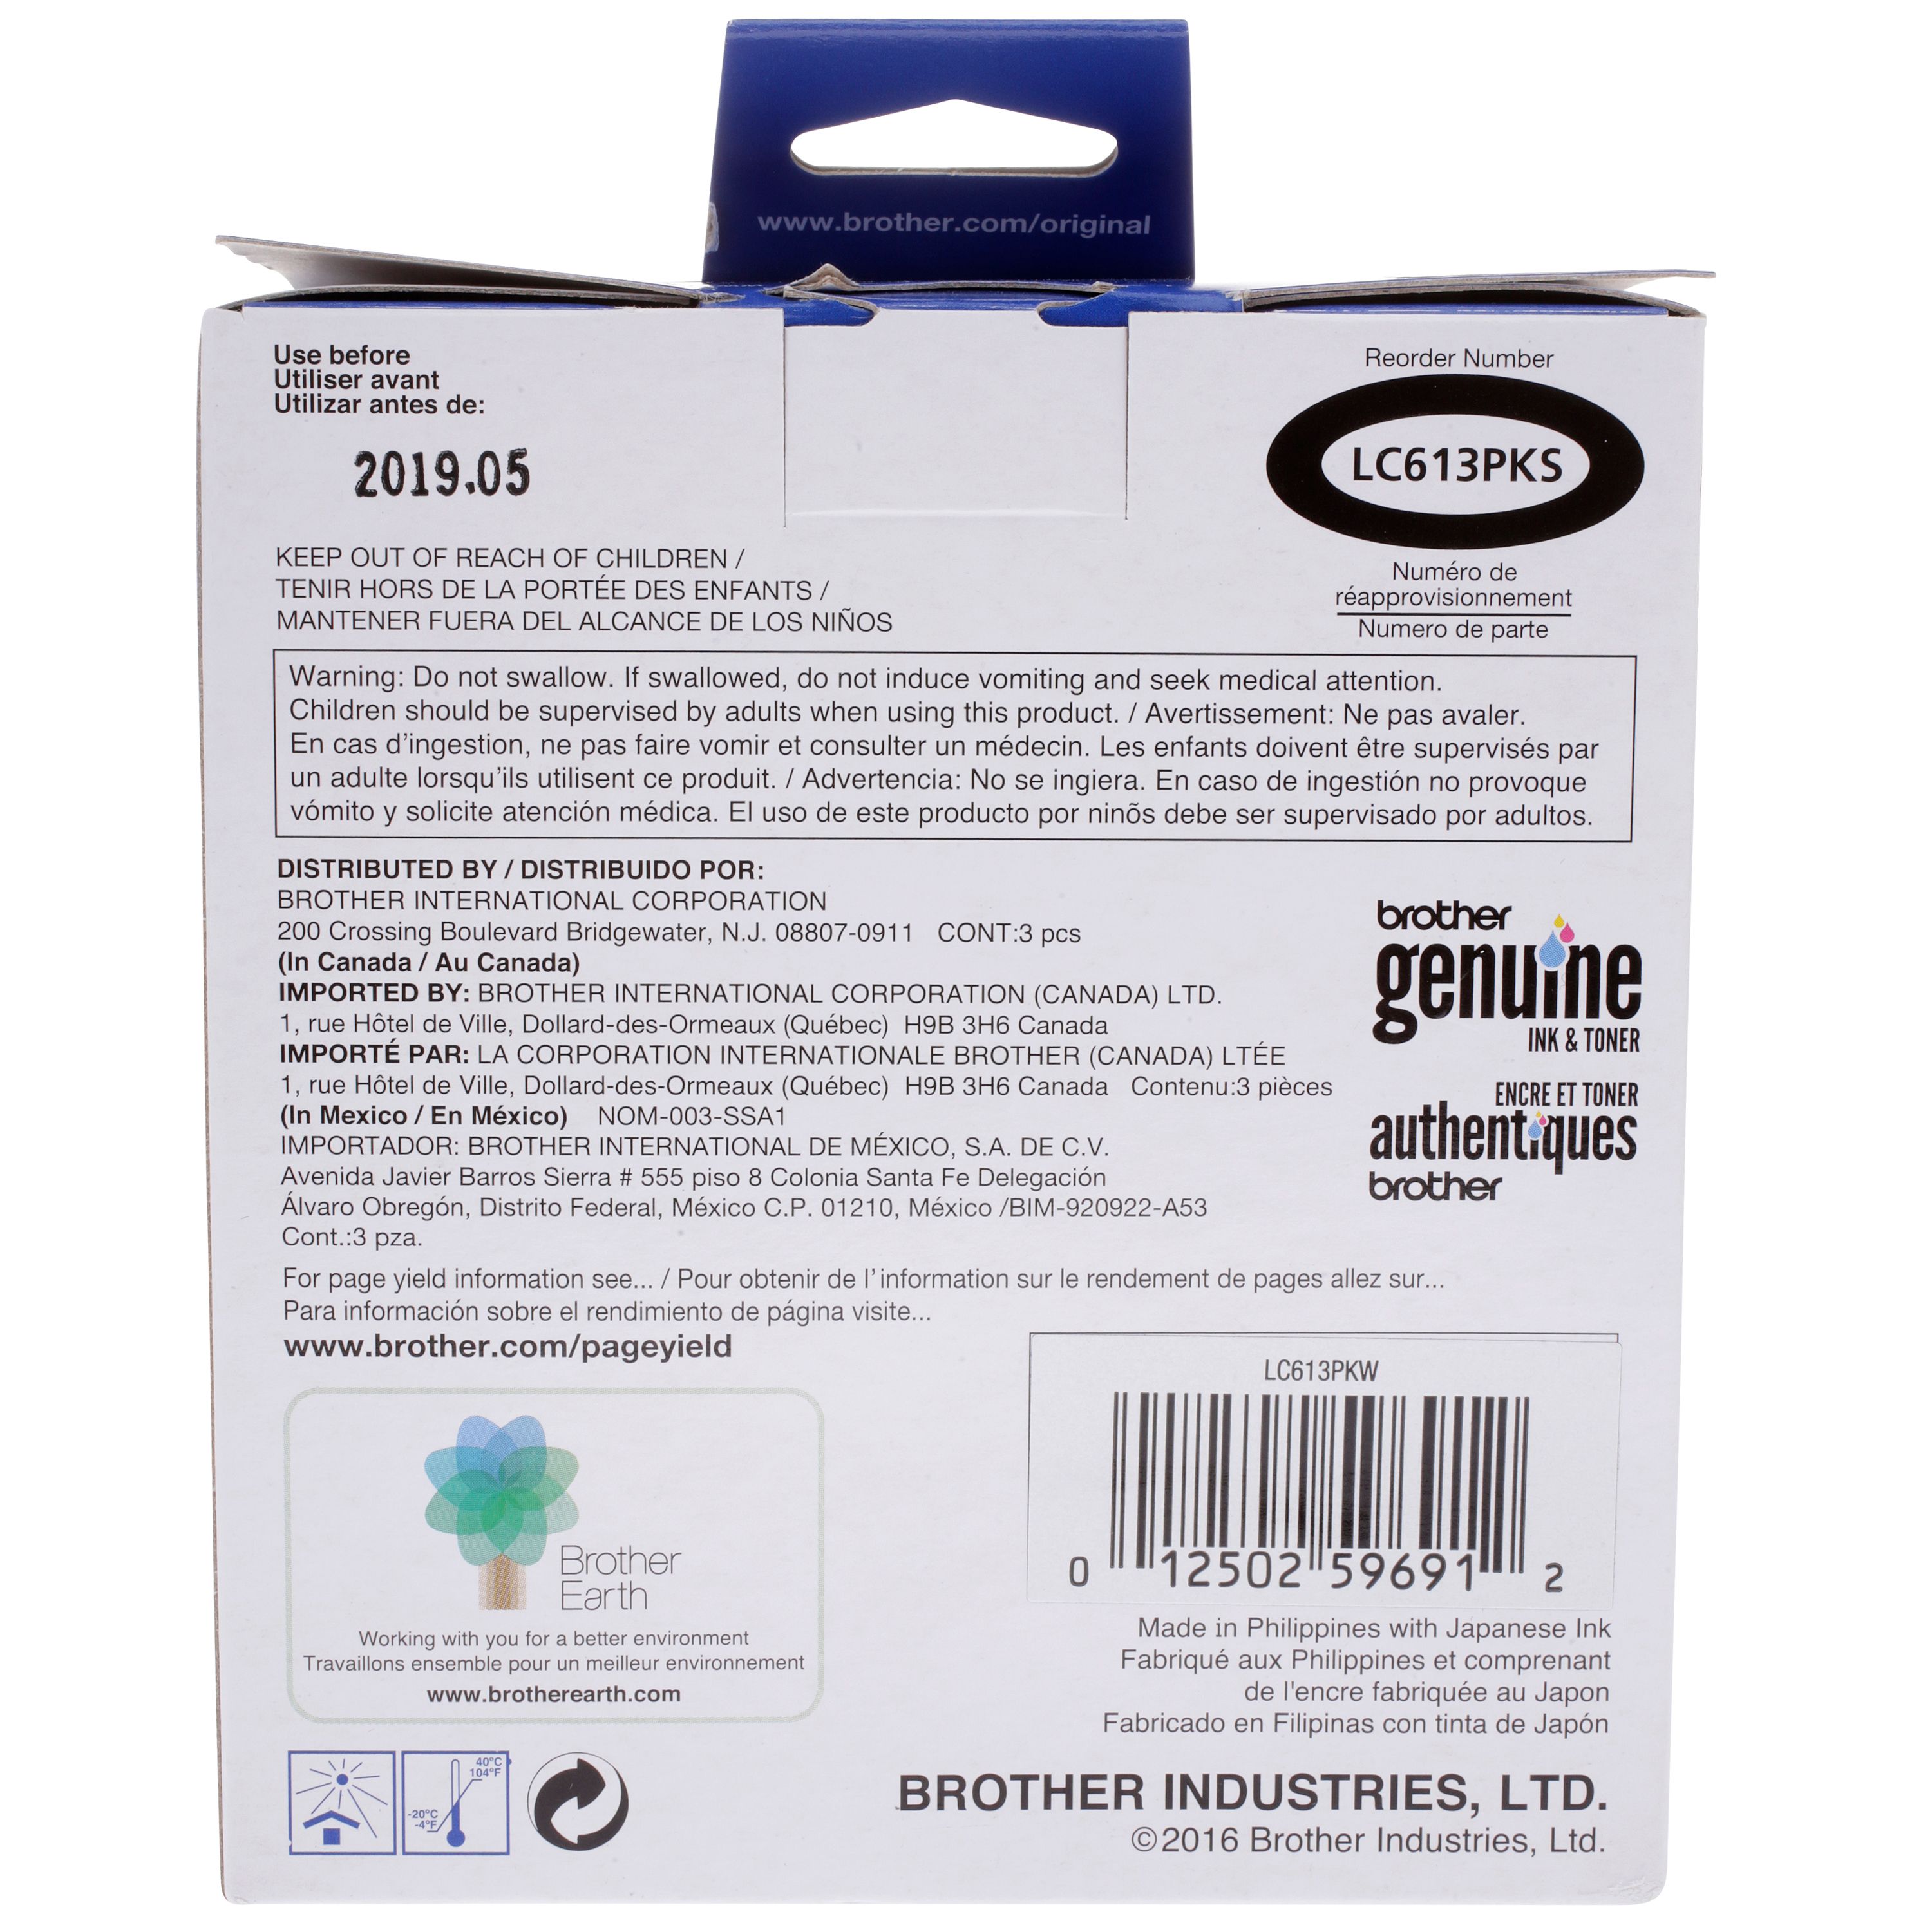 Brother Genuine Standard-yield Color Printer Ink Cartridges, LC613PKW - image 3 of 6